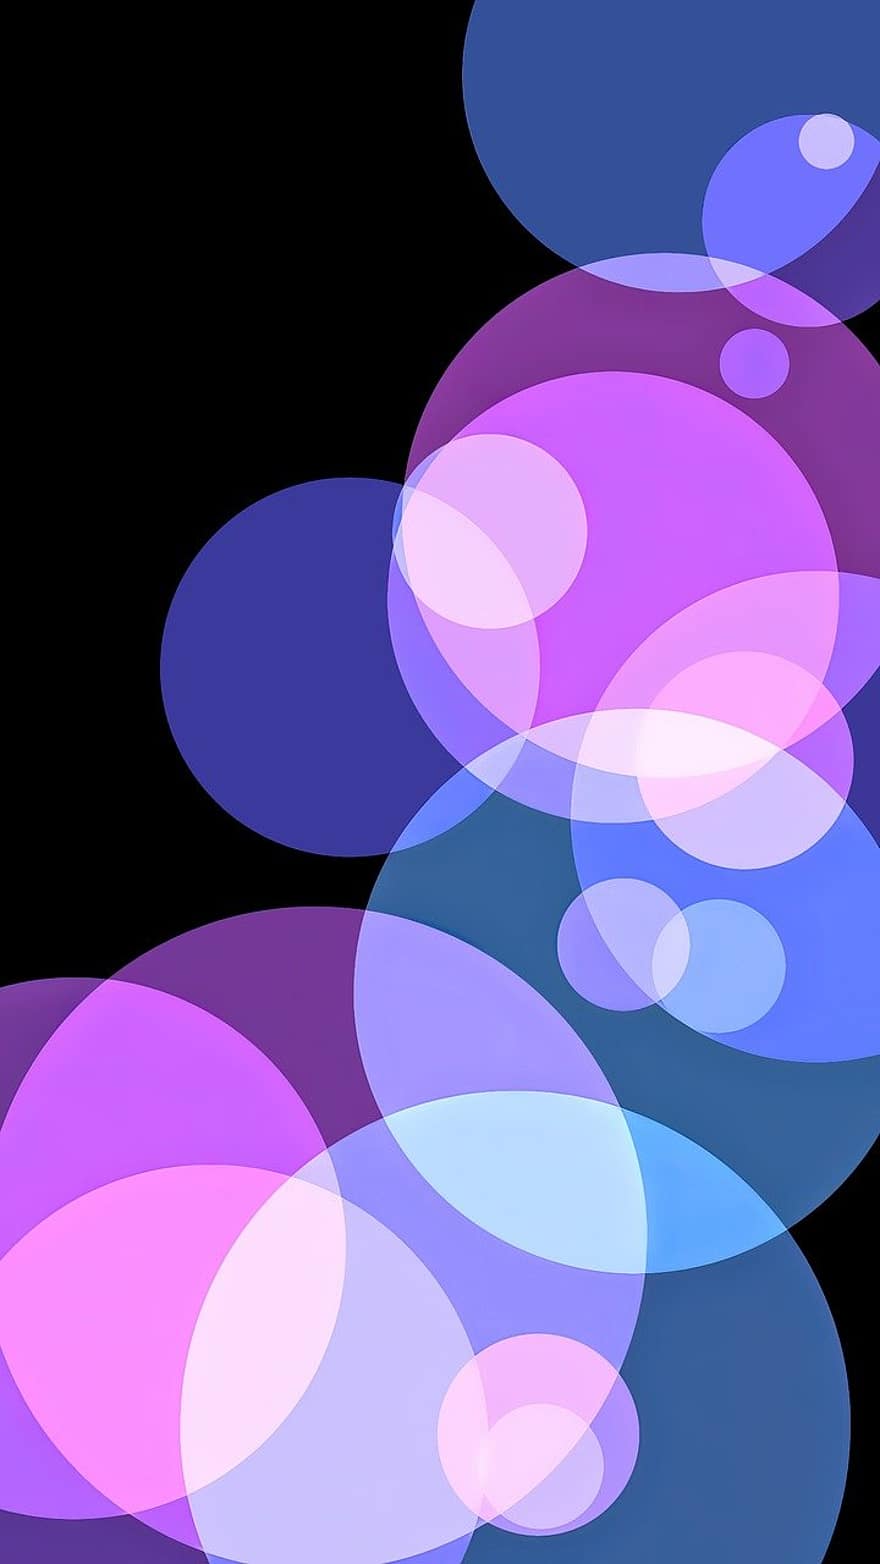 Abstract, Colored, Background, Round, Bubbles, Drawing, Digital Art, Project, Iphone Wallpaper, Background Smartphone, Cover